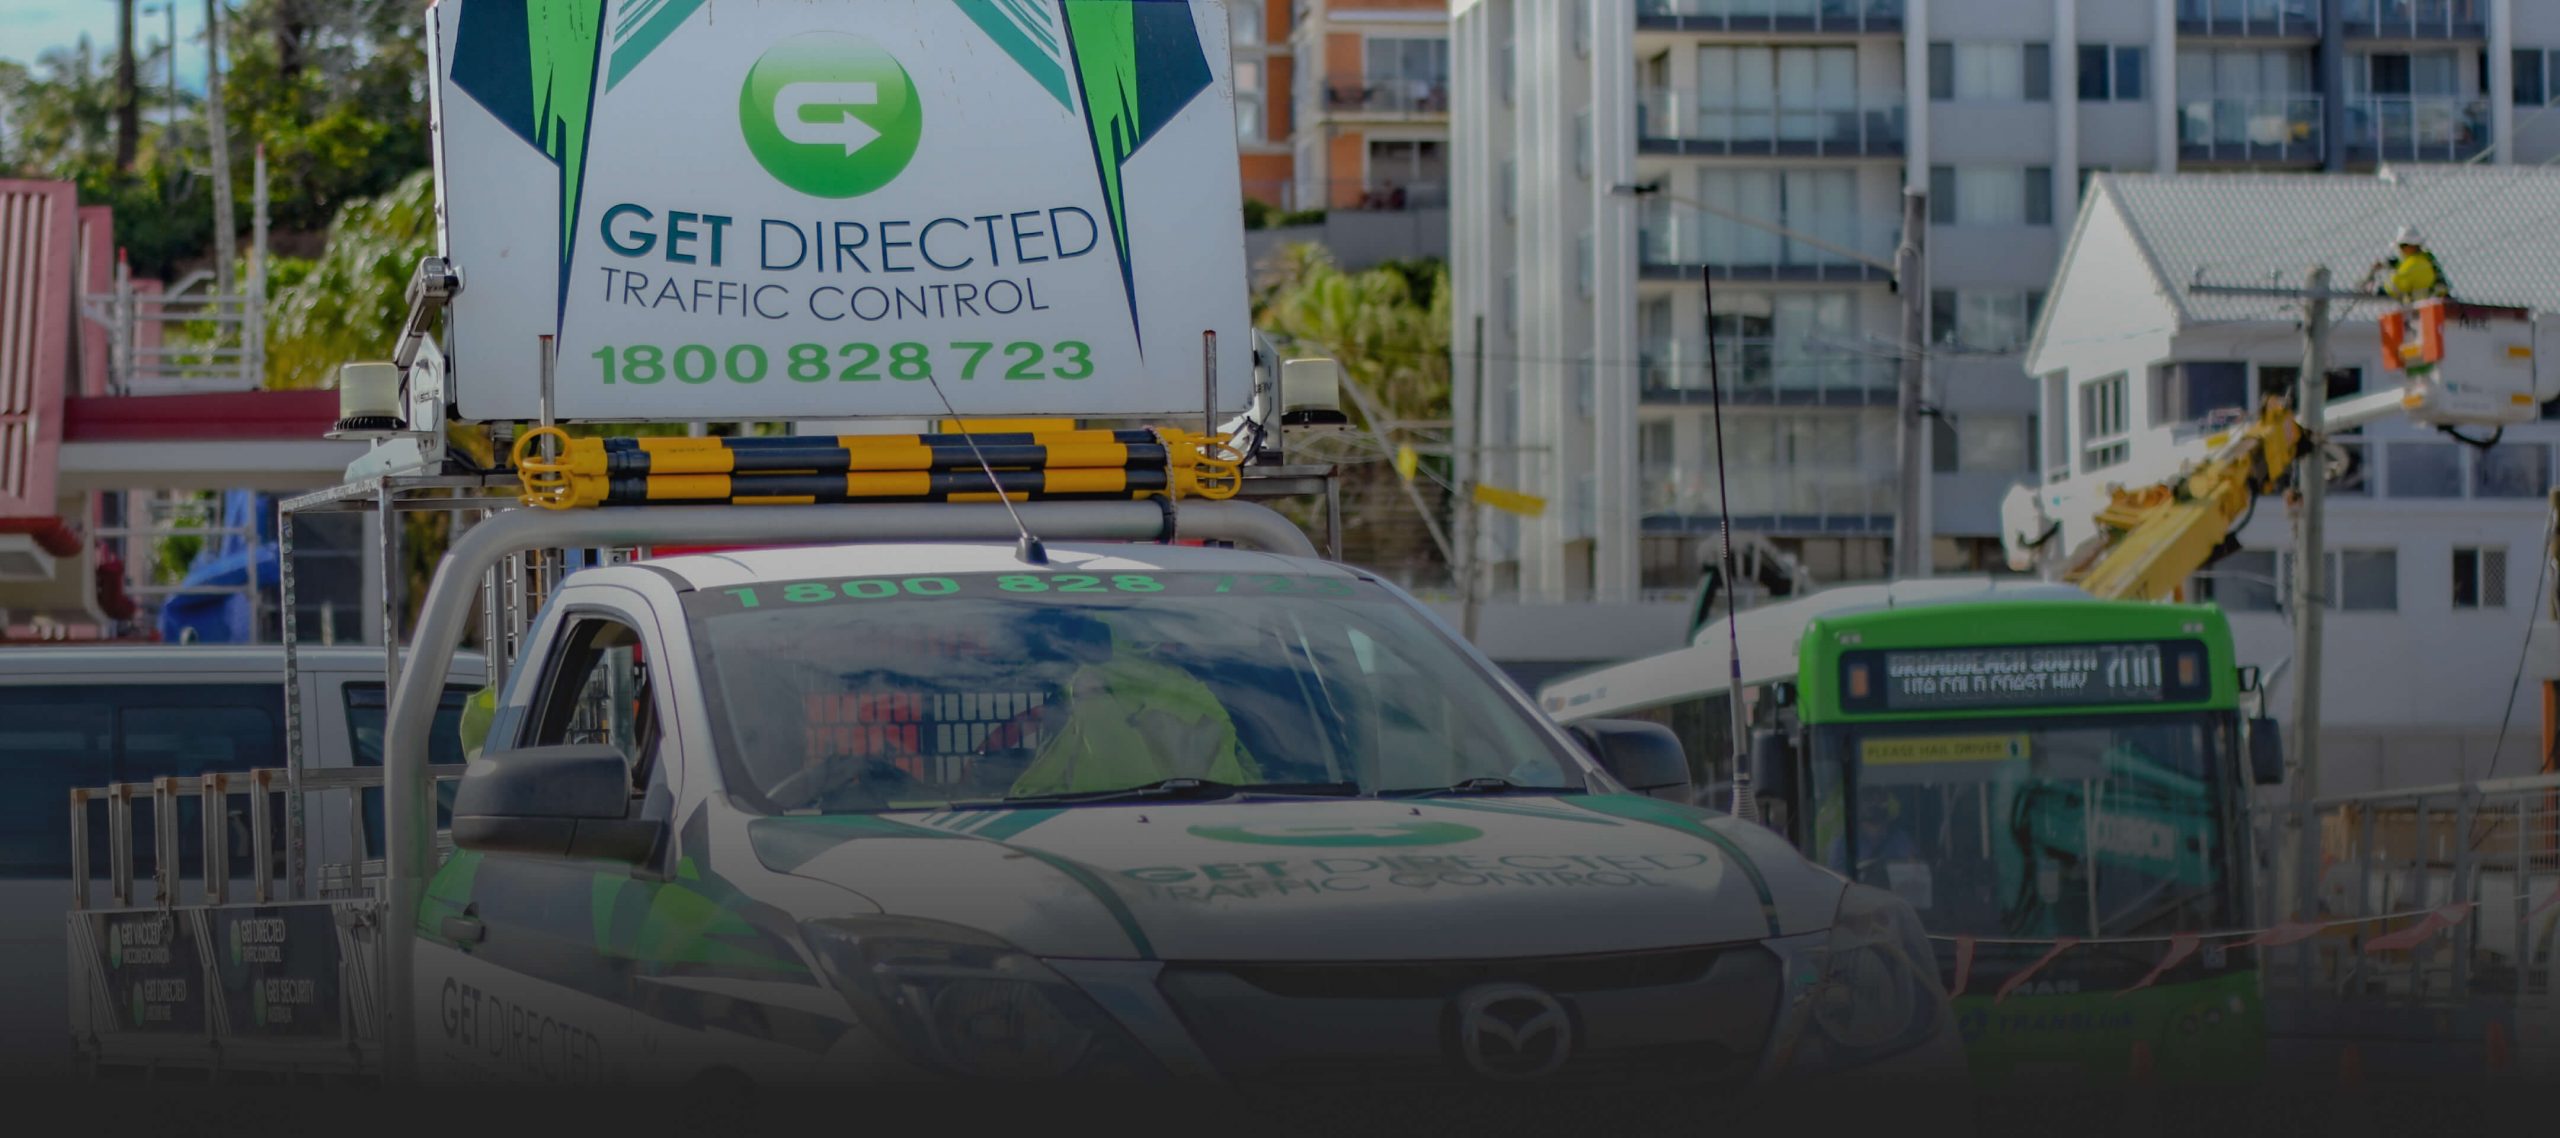 Get Directed traffic control